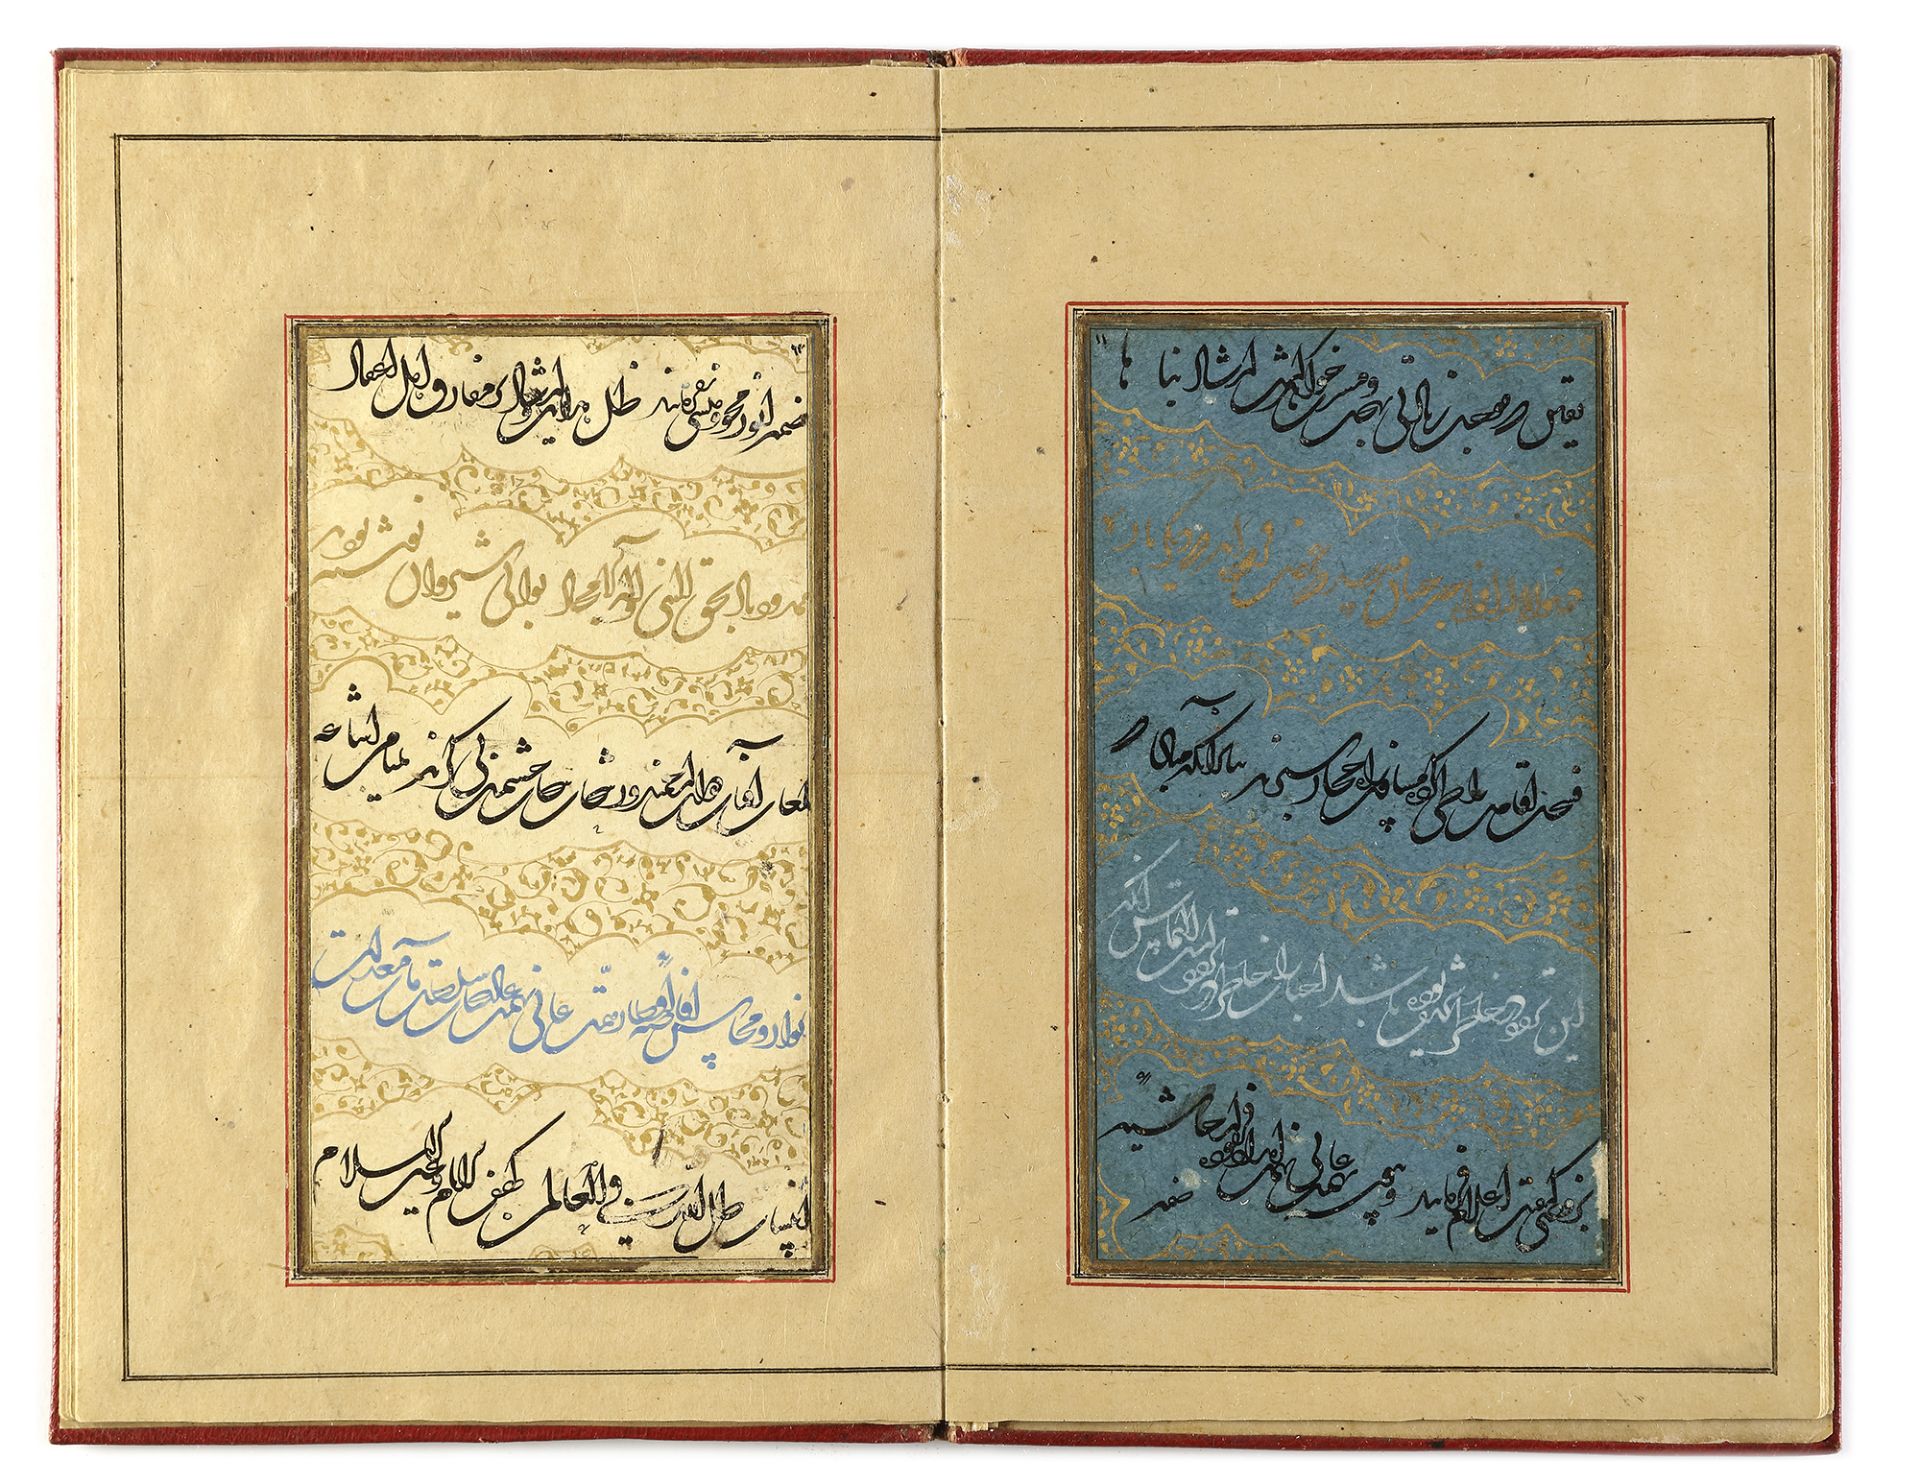 A MANUSCRIPT OF POETRY, SIGNED BY IKHTIYAR AL-MUNSHI, PERSIA, SAVAFID, DATED 975 AH/1567-68 AD - Image 7 of 18